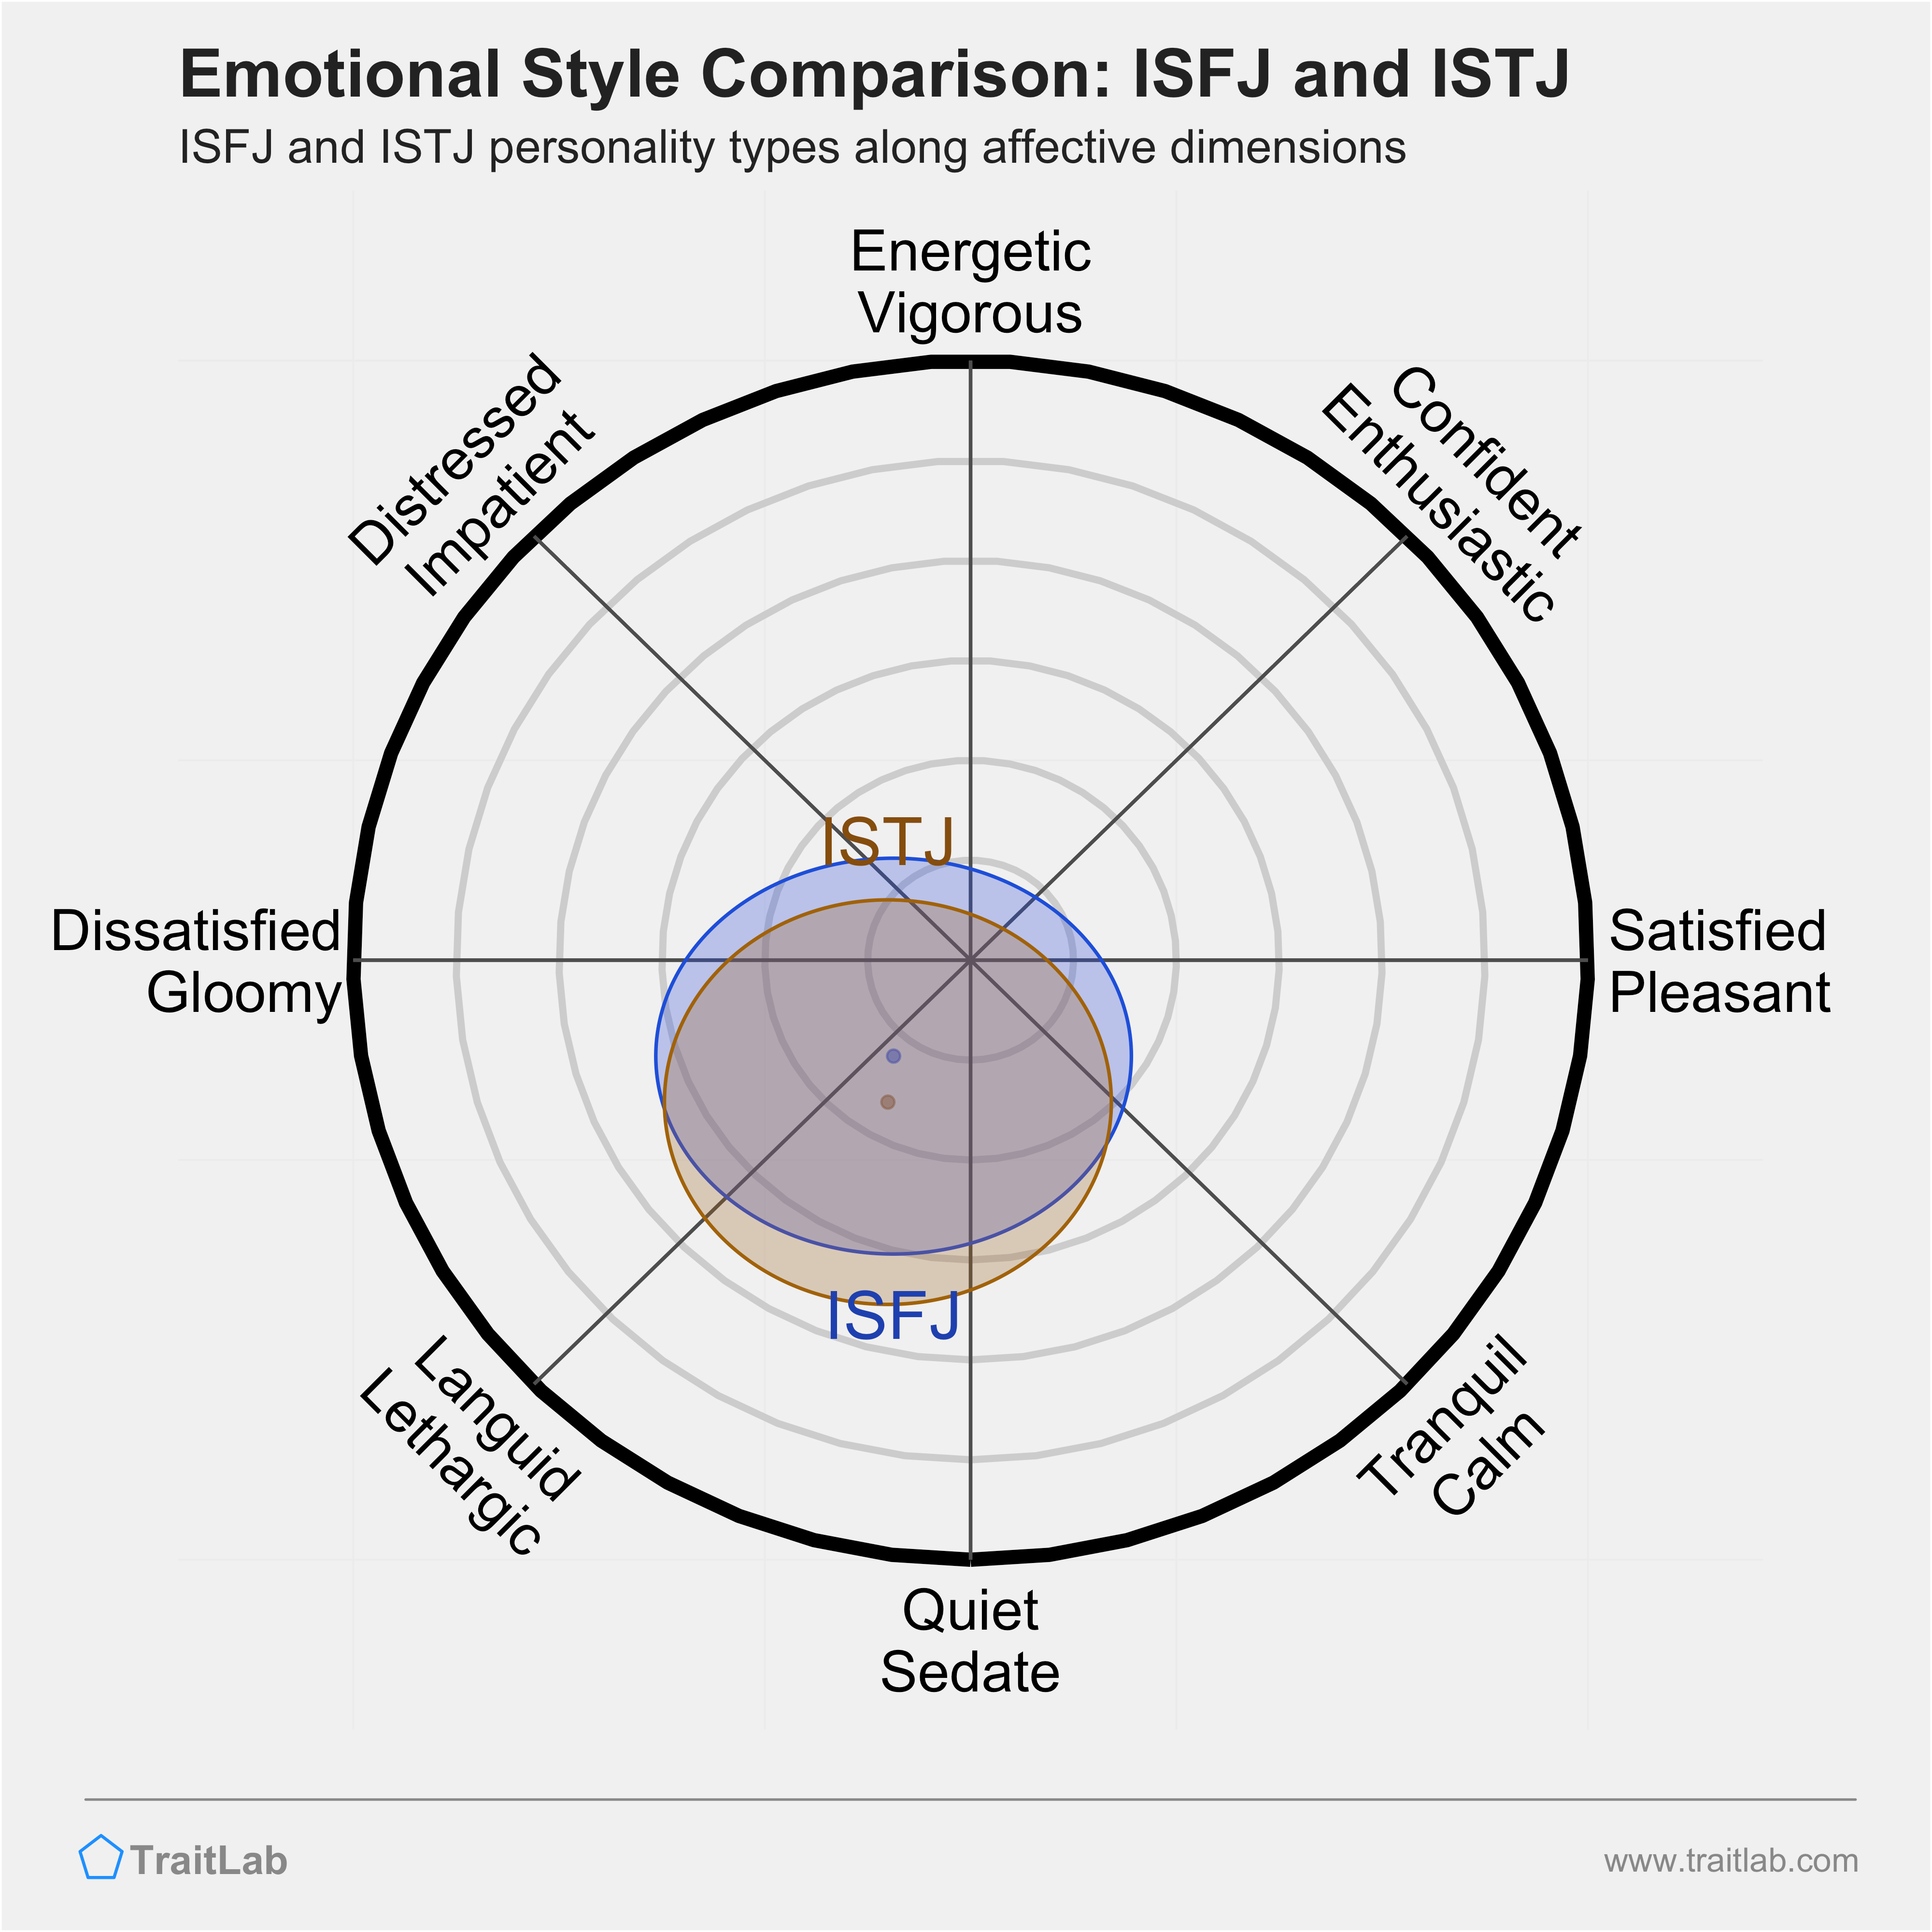 ISFJ and ISTJ comparison across emotional (affective) dimensions